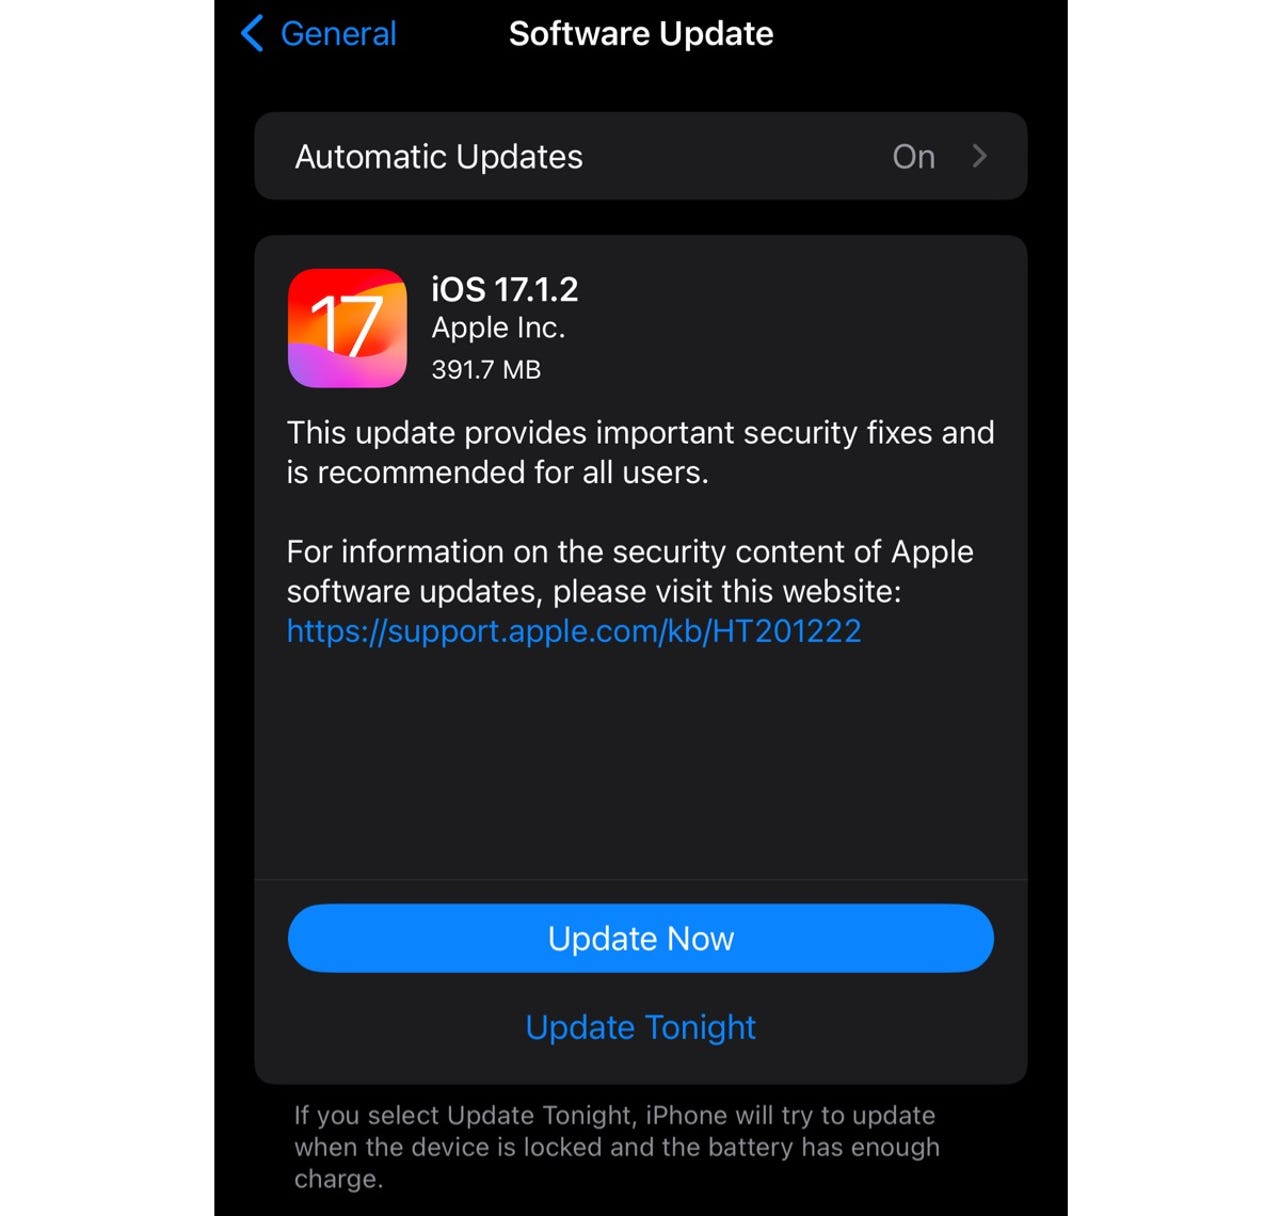 iOS 17.1.2 update for the iPhone